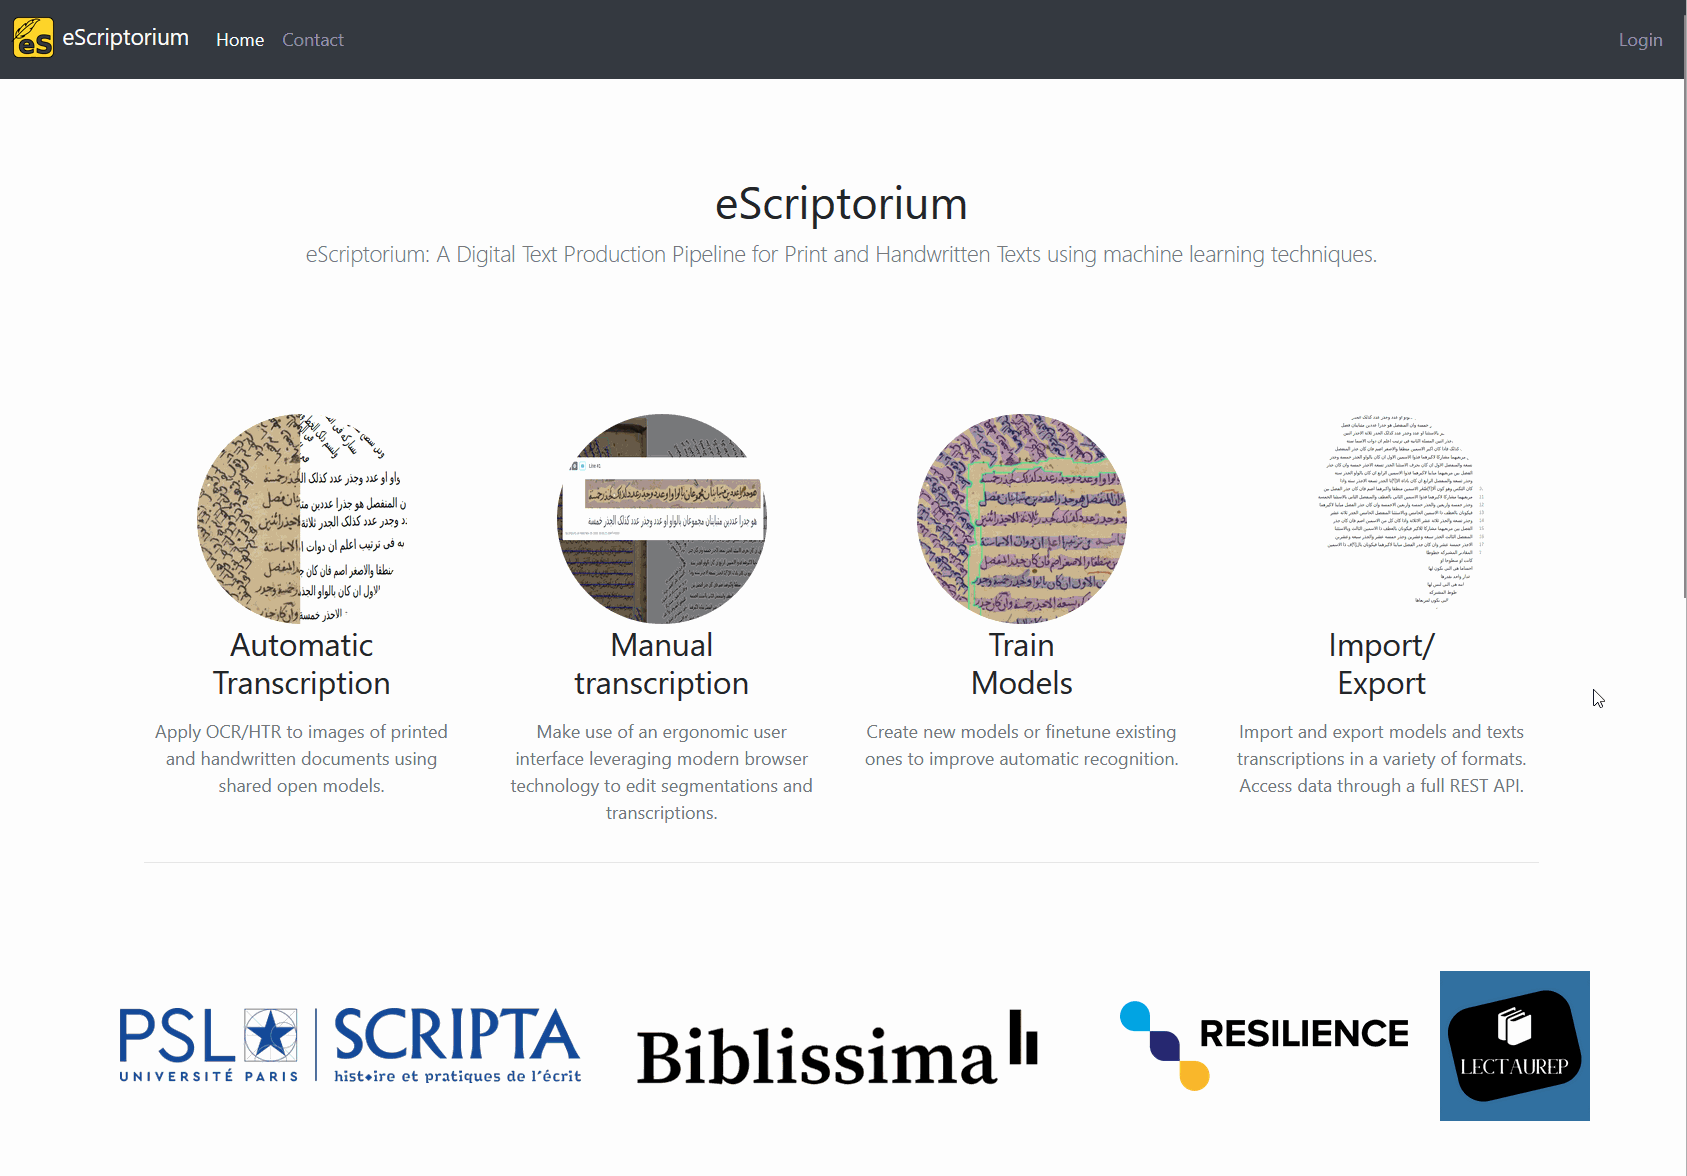 image: scrolling on the homepage of eScriptorium and logging into the application